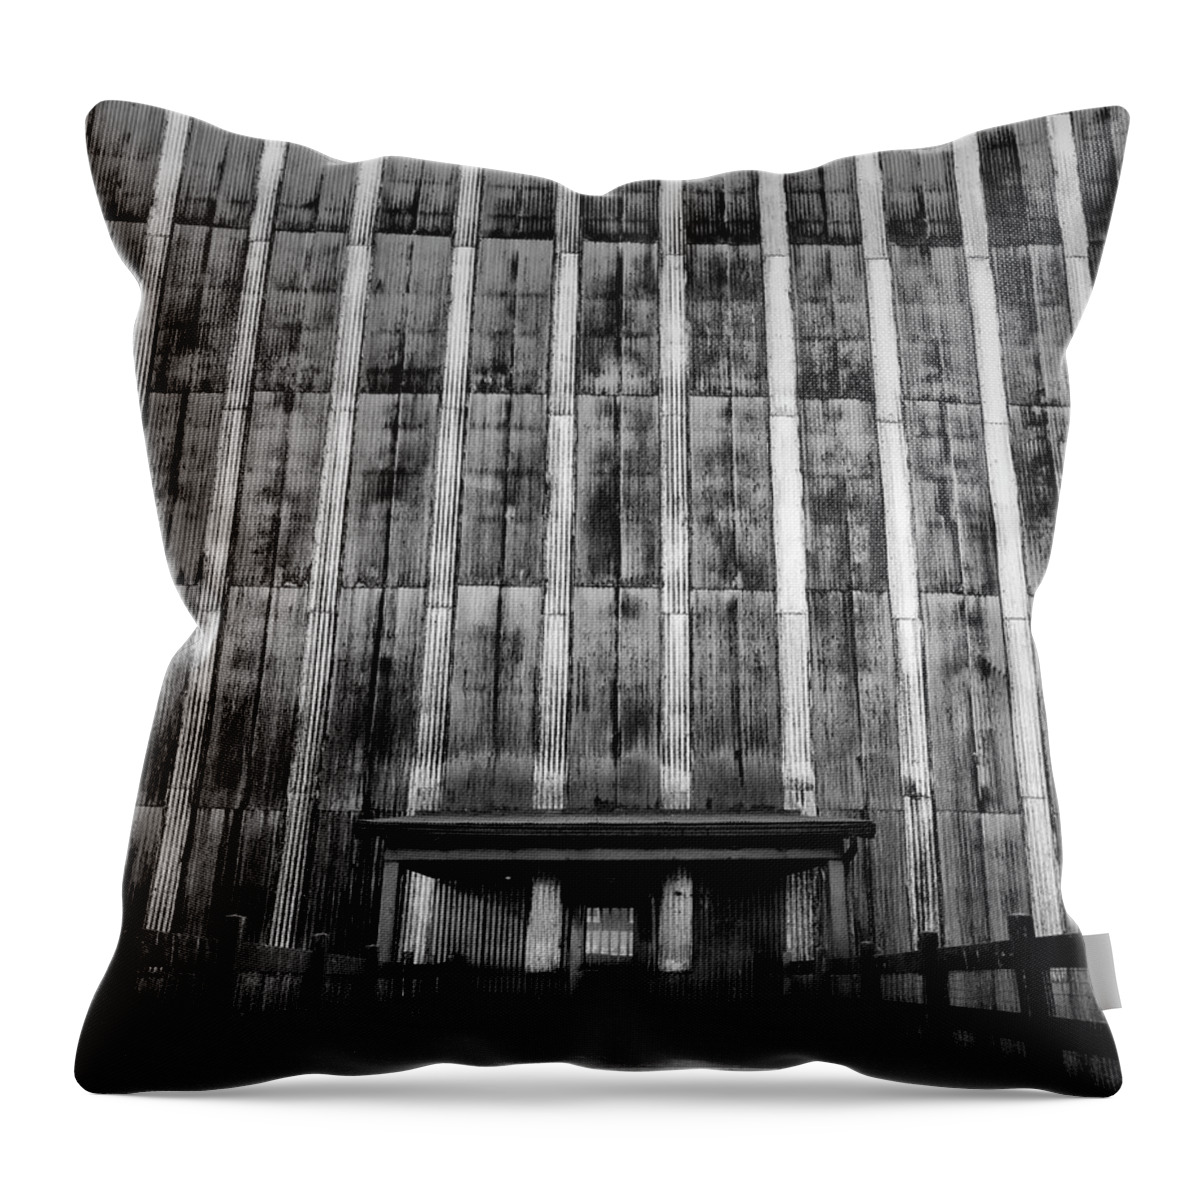 Rackhouse Throw Pillow featuring the photograph Rackhouse Entrance by Stephen Stookey